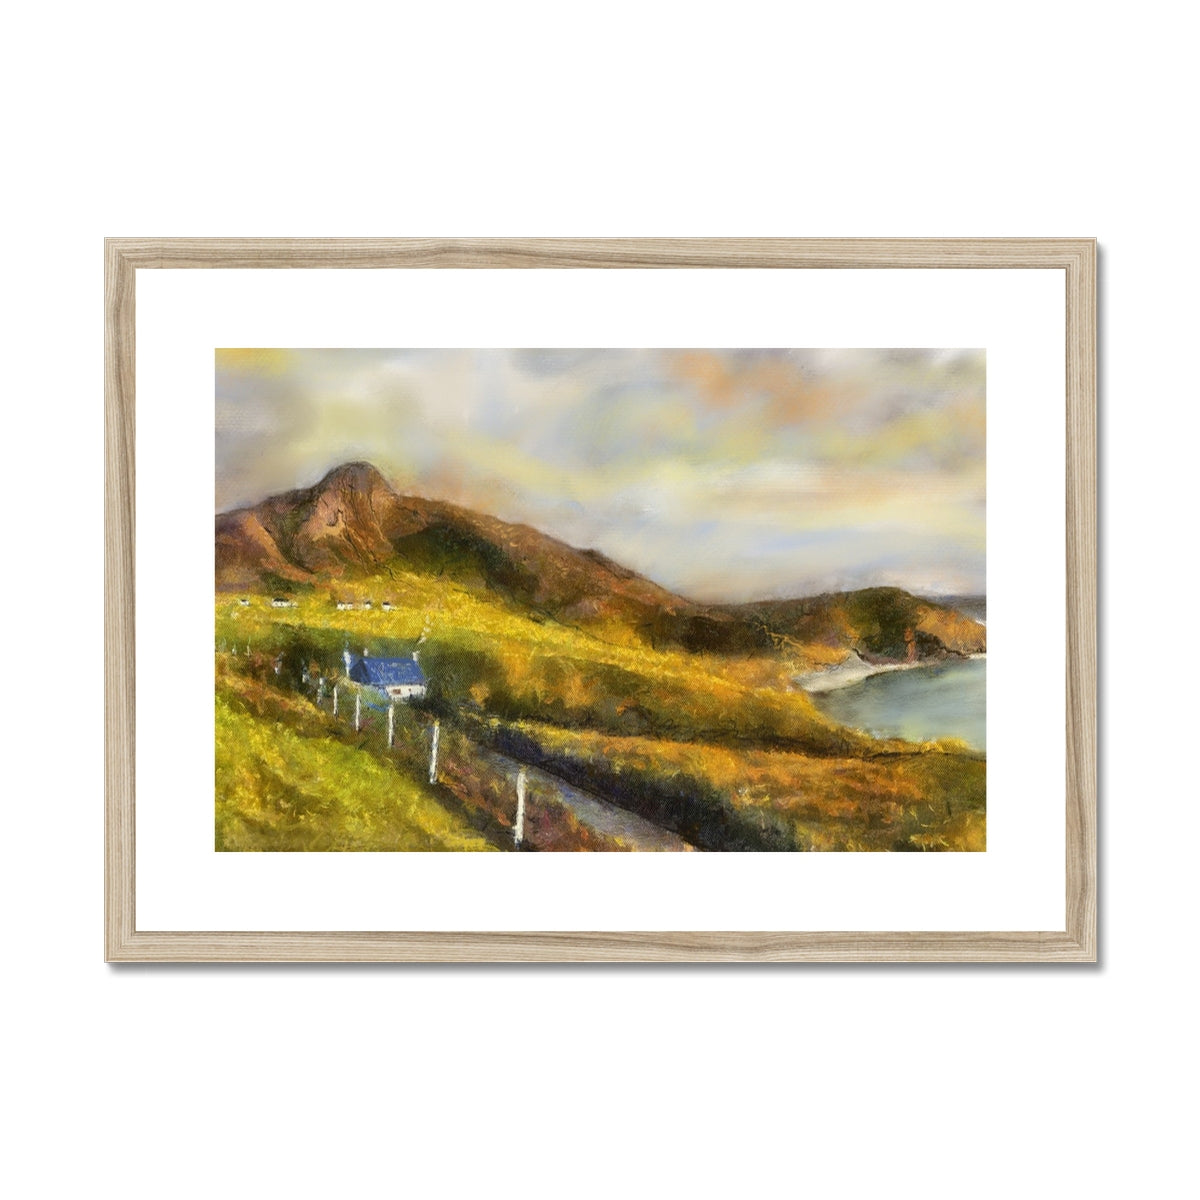 Coldbackie Painting | Framed & Mounted Prints From Scotland-Framed & Mounted Prints-Scottish Highlands & Lowlands Art Gallery-A2 Landscape-Natural Frame-Paintings, Prints, Homeware, Art Gifts From Scotland By Scottish Artist Kevin Hunter